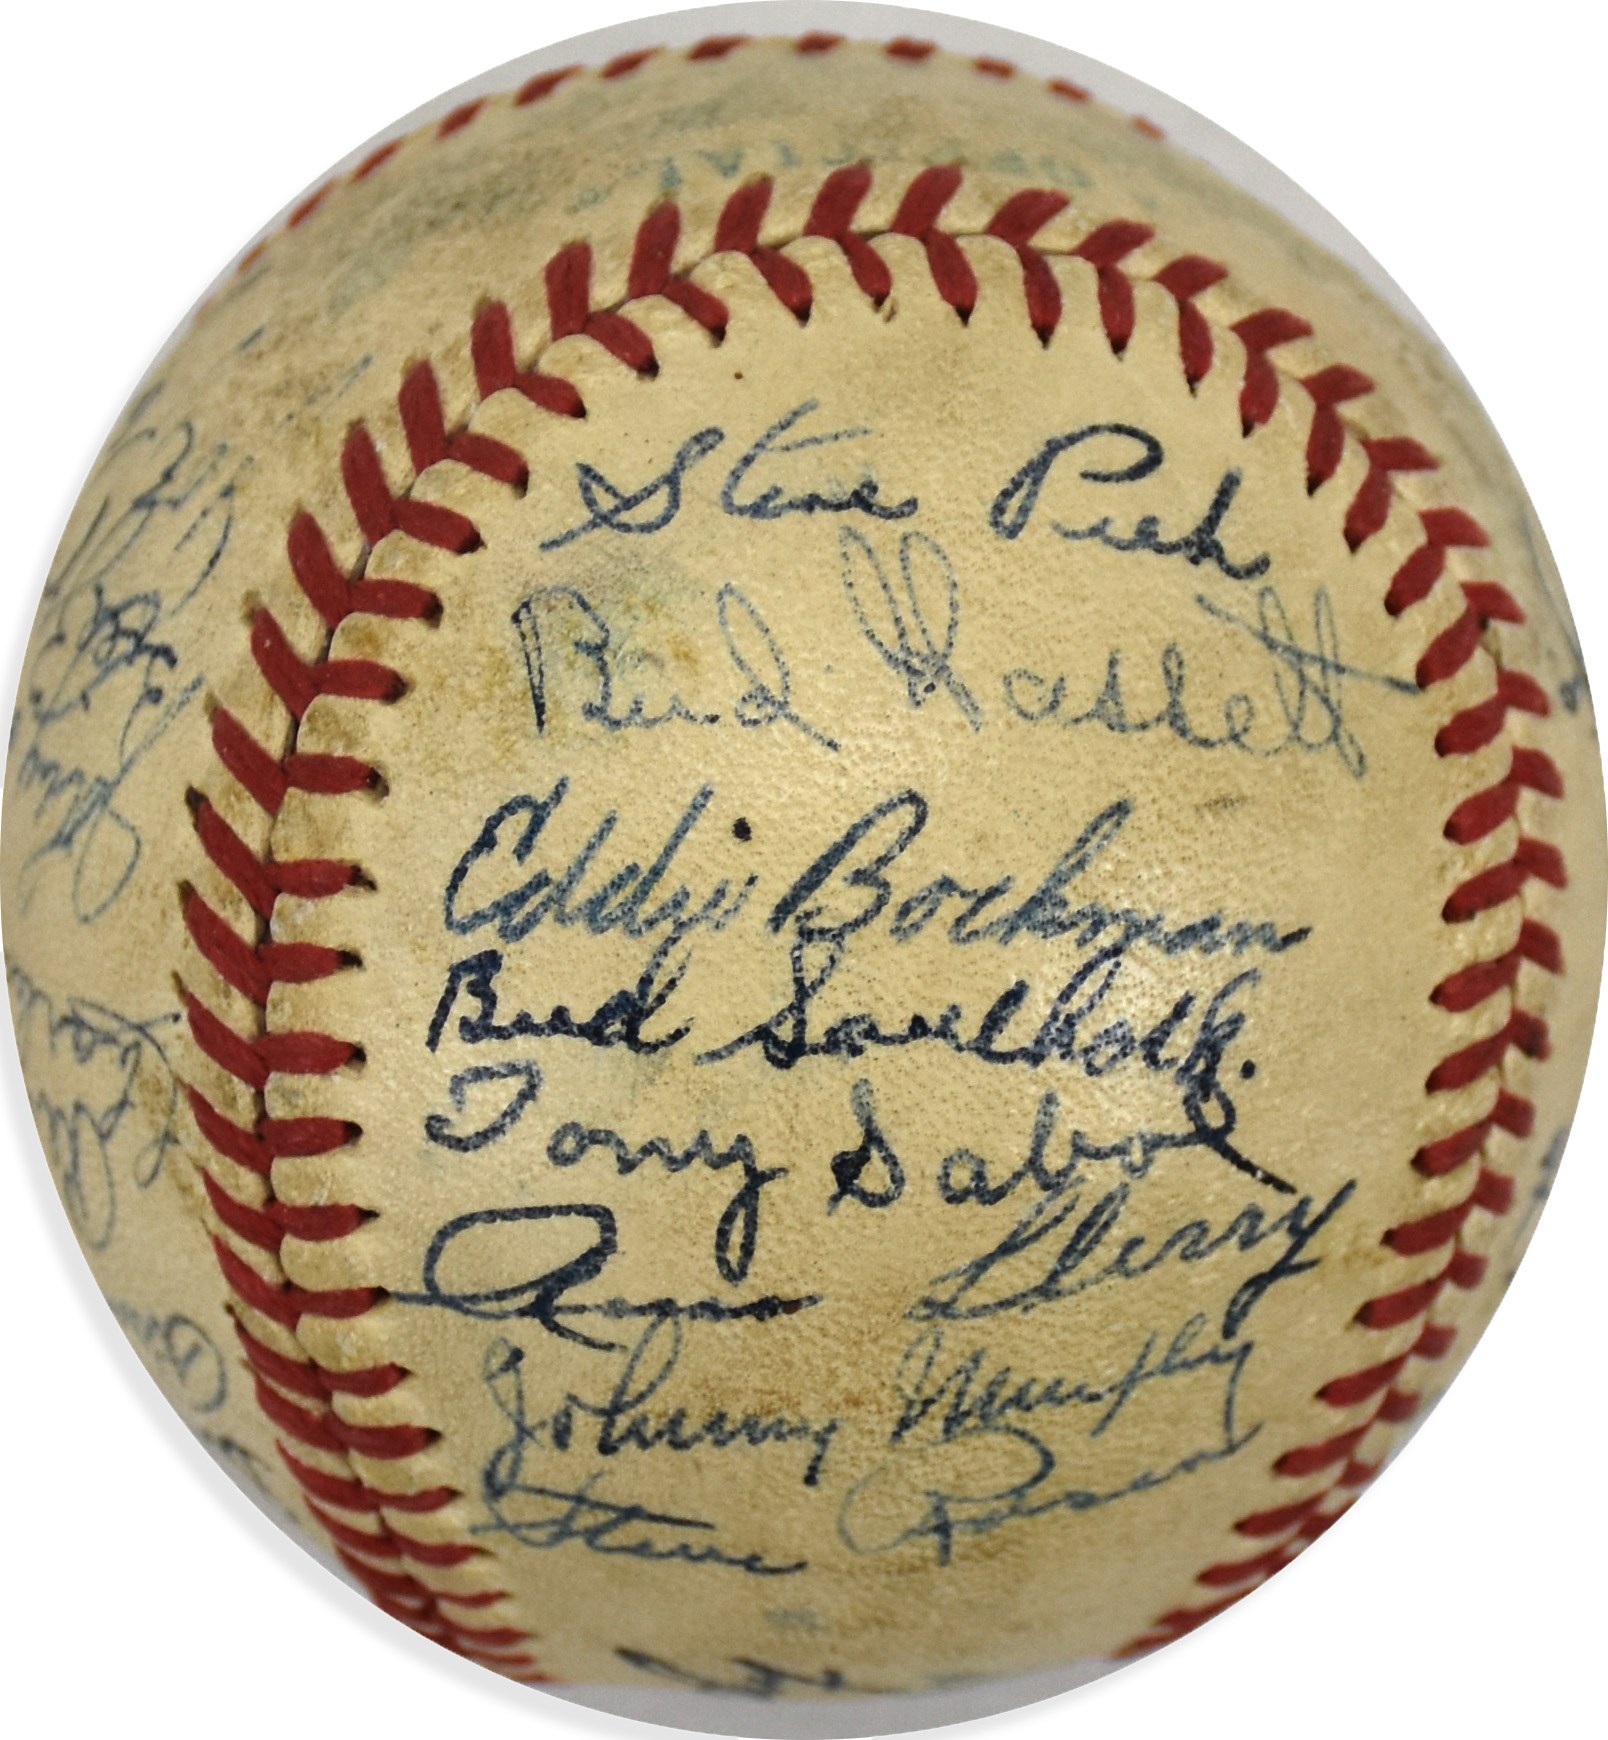 NY Yankees, Giants & Mets - 1946 New York Yankees Team-Signed Baseball from Pete Sheehy (PSA)